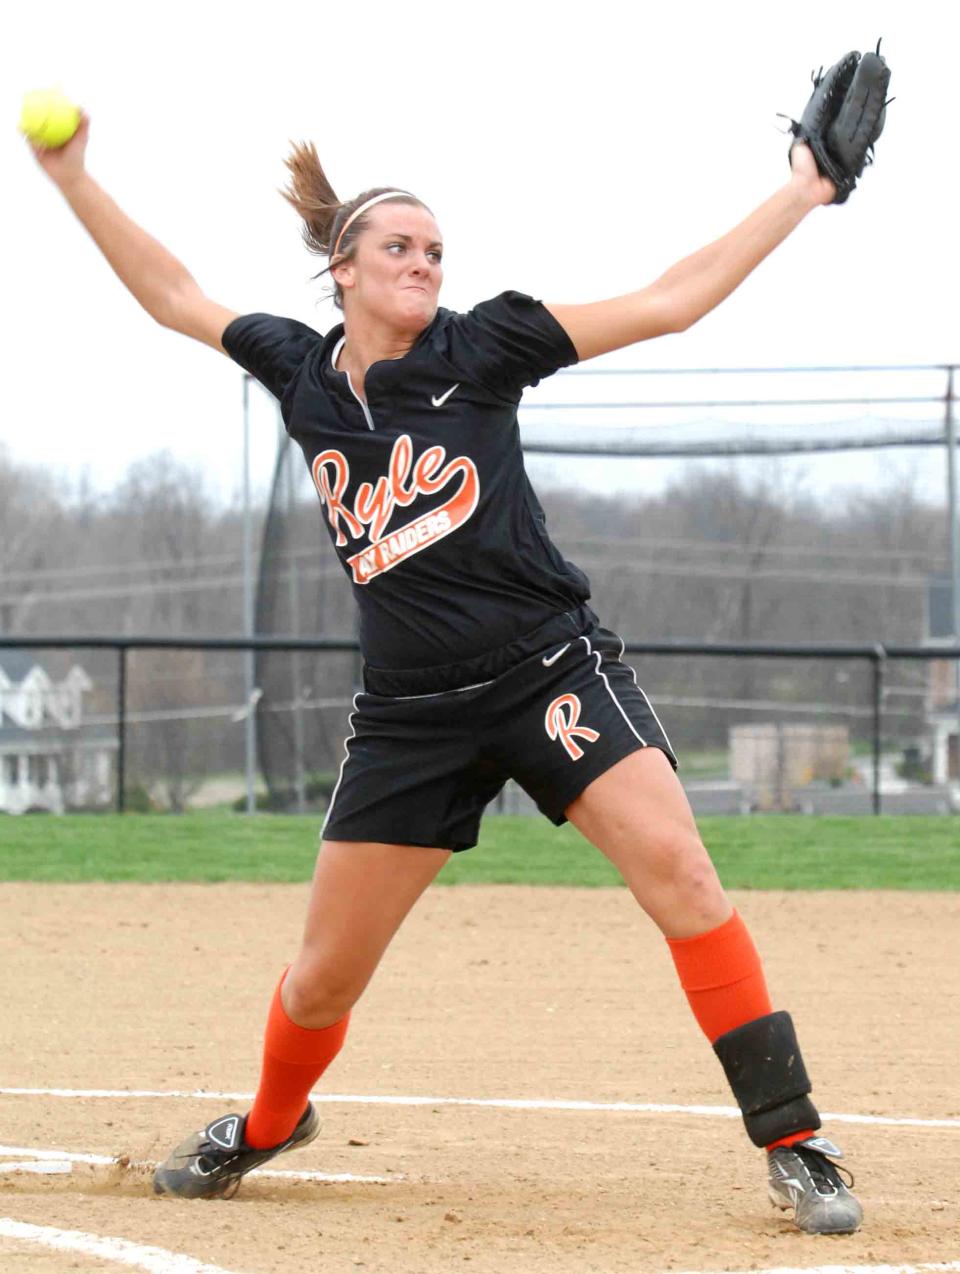 Kirsten Allen of Ryle threw 41 no-hitters and set 10 Kentucky softball records in leading the Raiders to the 2006 state title and a runner-up finish in 2007. She went on to play at the University of Oklahoma.